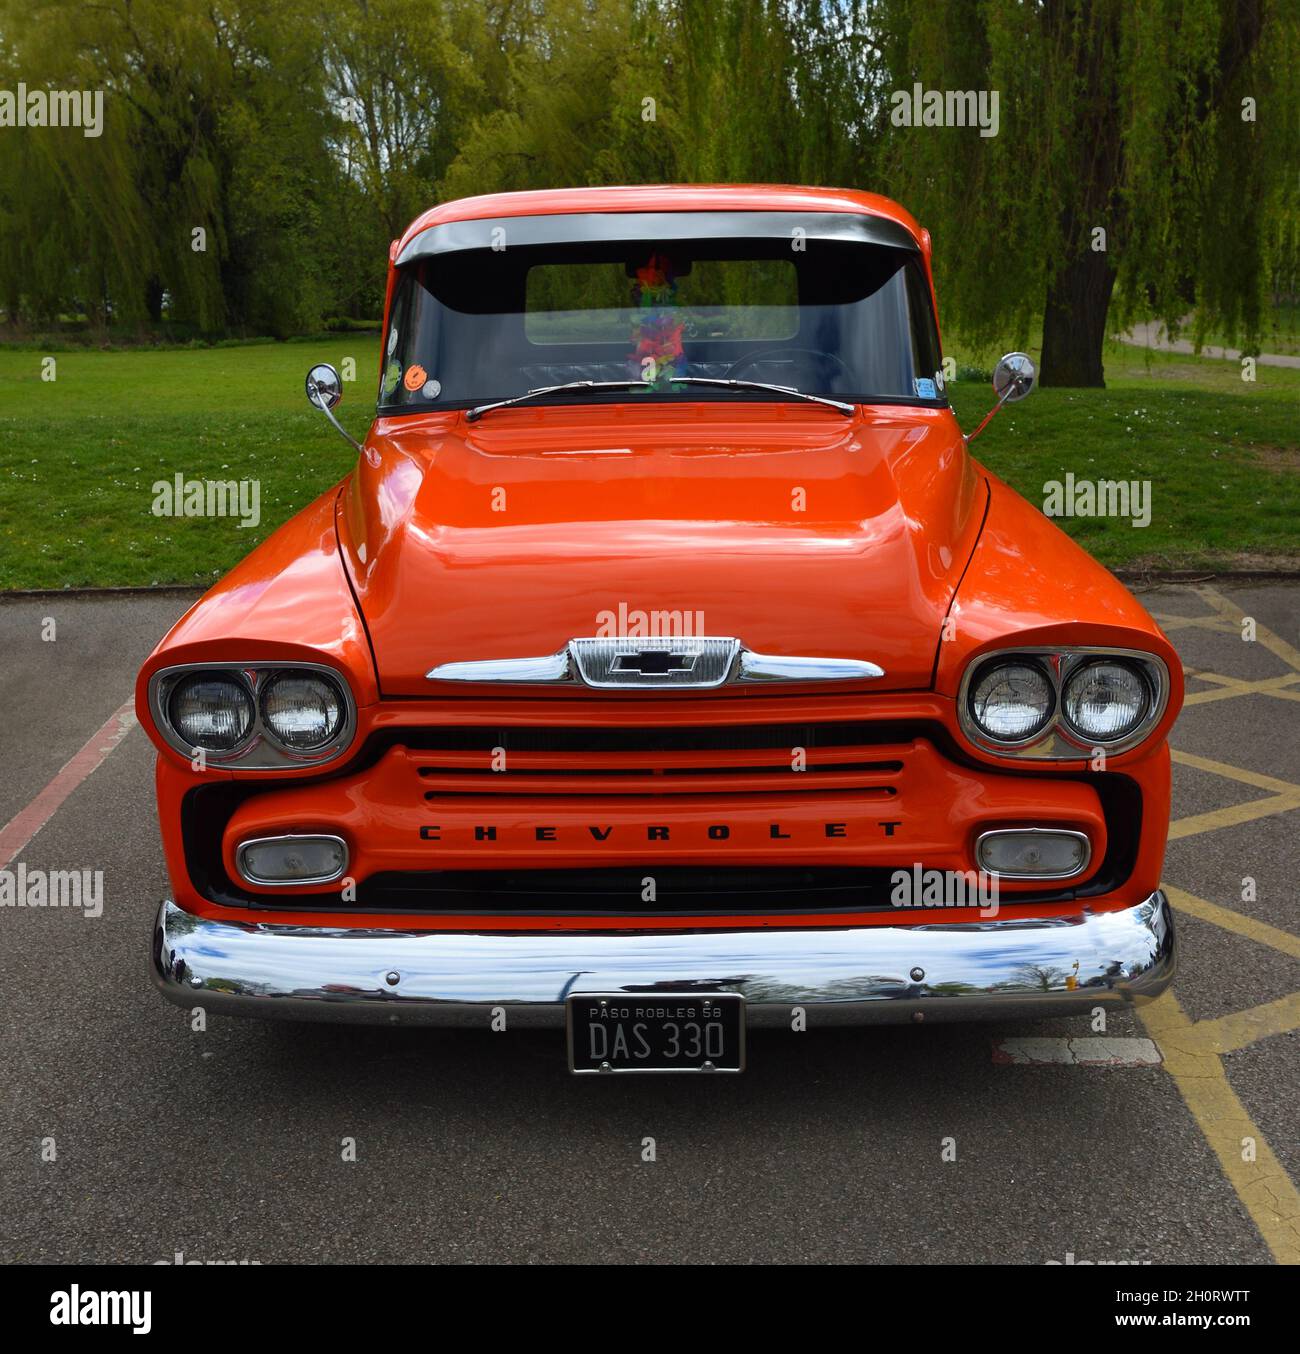 Vintage Stony 2018 - 1958 Chevrolet Apache pick-up - DAS 330 in Orange  view from front. Stock Photo